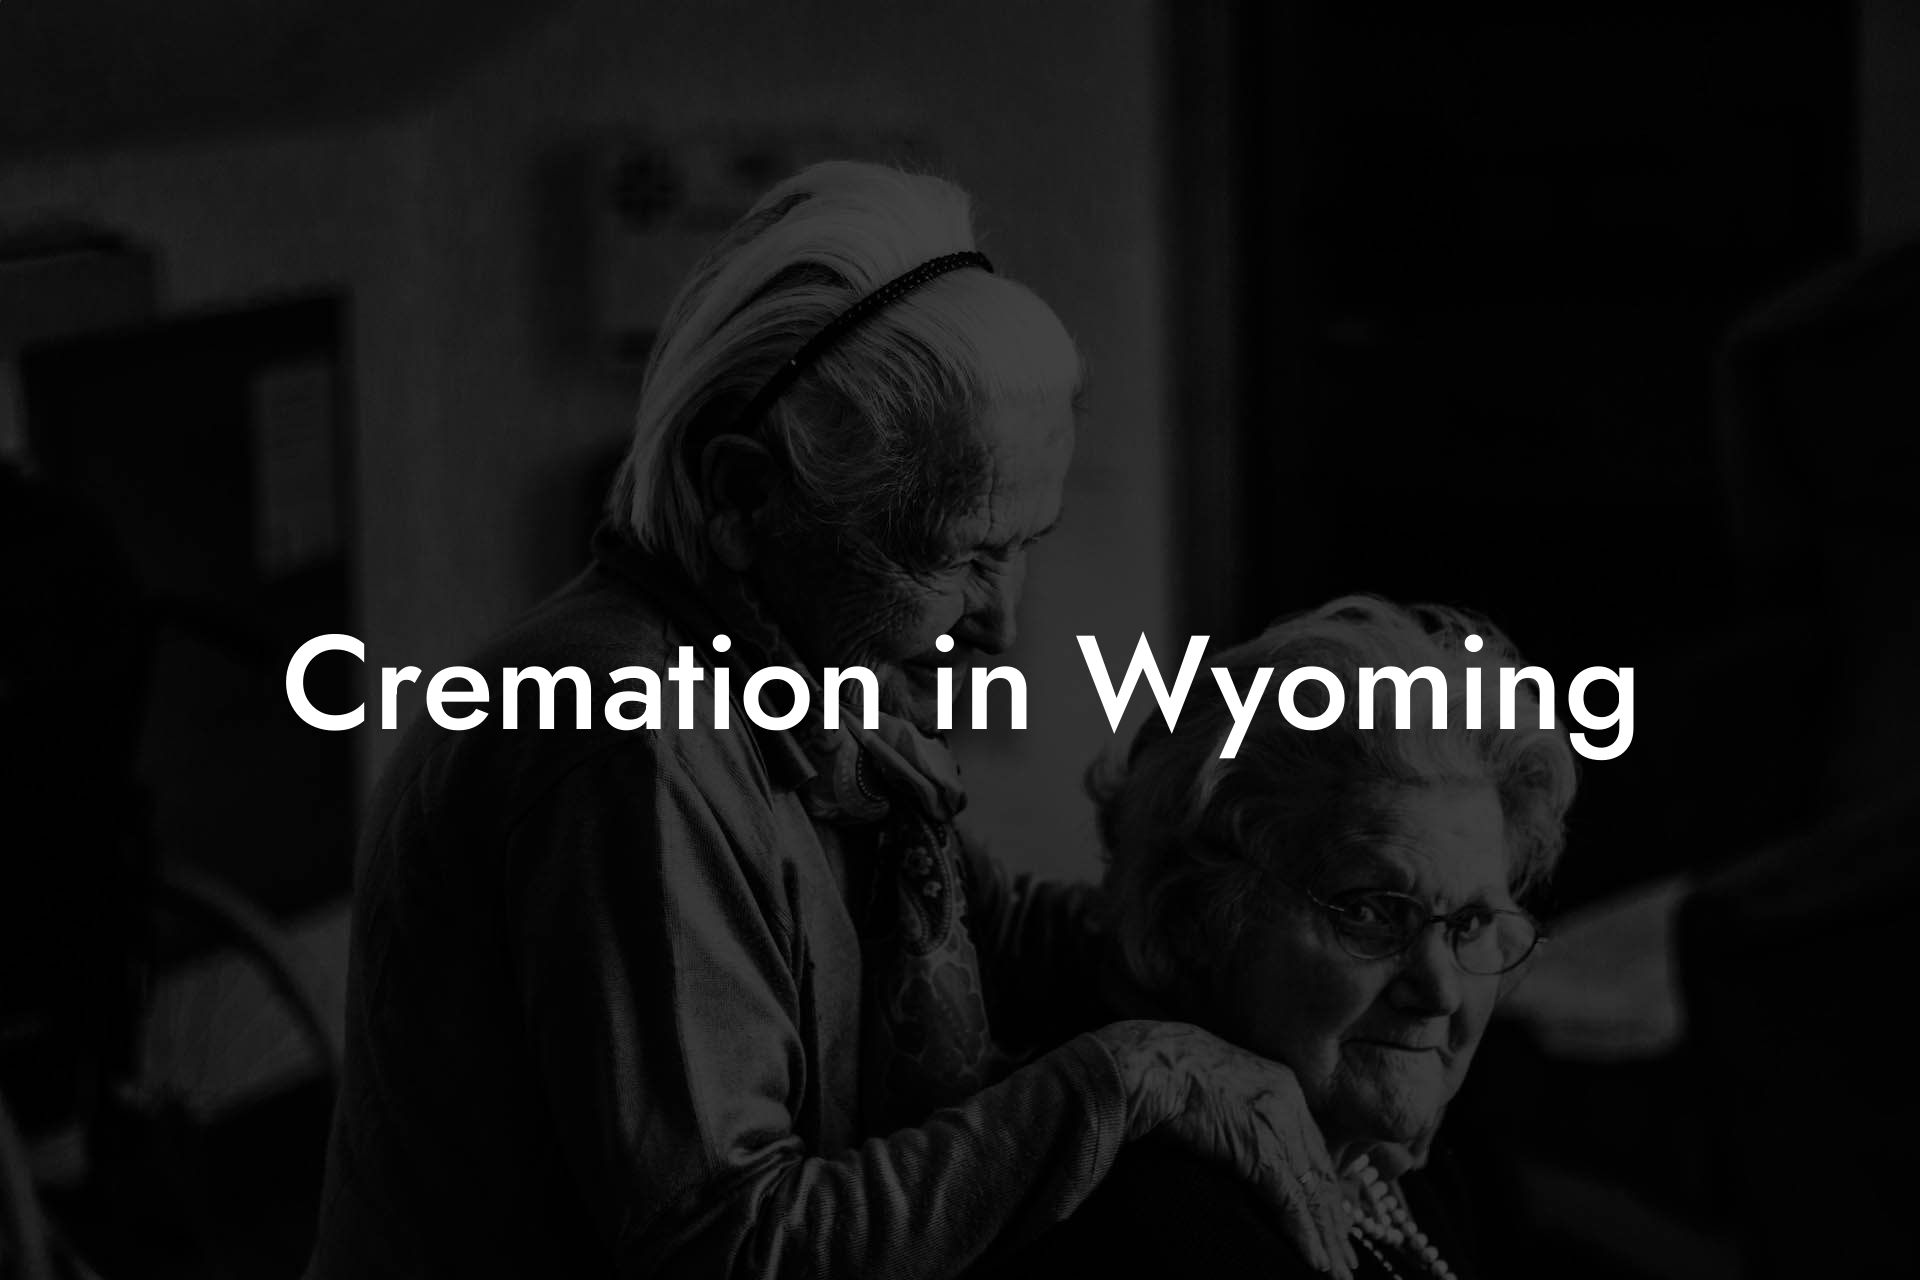 Cremation in Wyoming